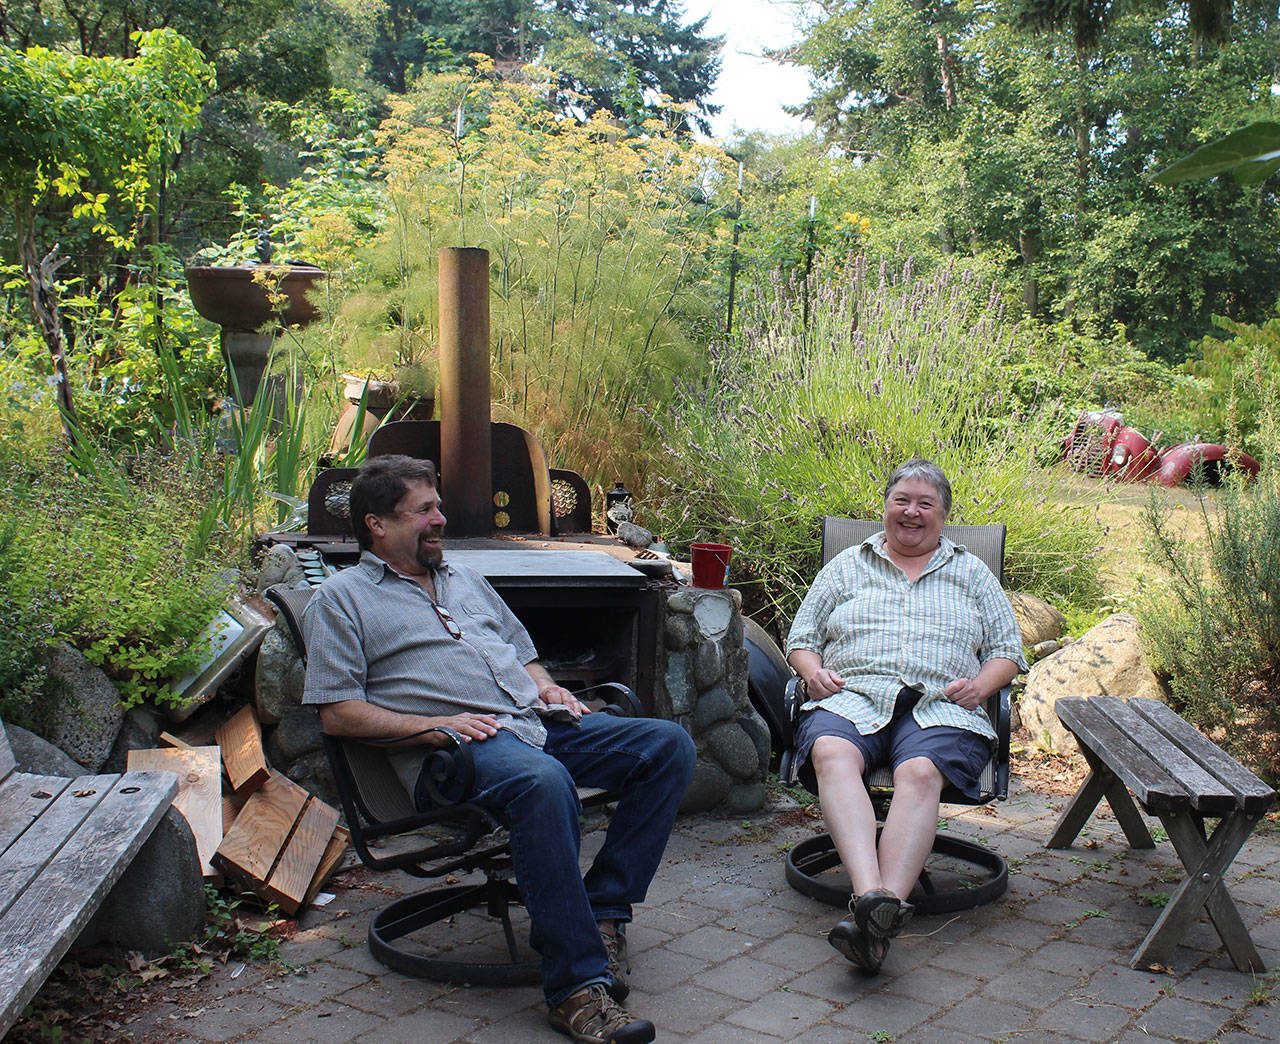 Bruce Morrow and Buffy Cribbs enjoy the outdoor patio at their South Whidbey home they built together.